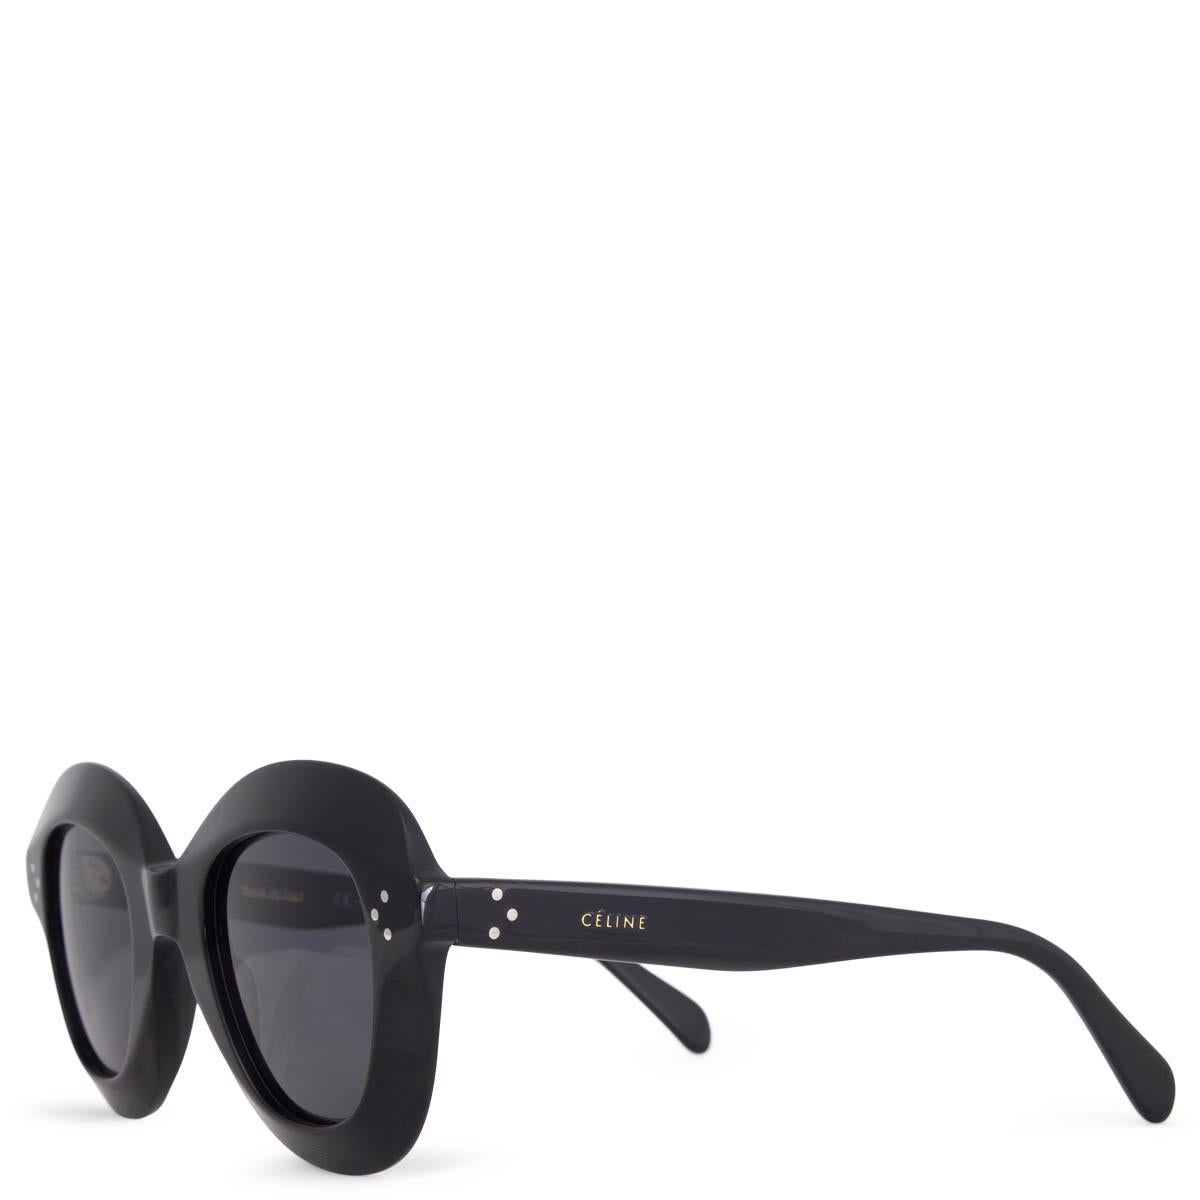 100% authentic Céline Lola sunglasses in black acetate with grey lenses. Have been worn and are in excellent condition. Come with soft case. 

Measurements
Model	CL 41445/S
Width	14cm (5.5in)
Height	6cm (2.3in)

All our listings include only the